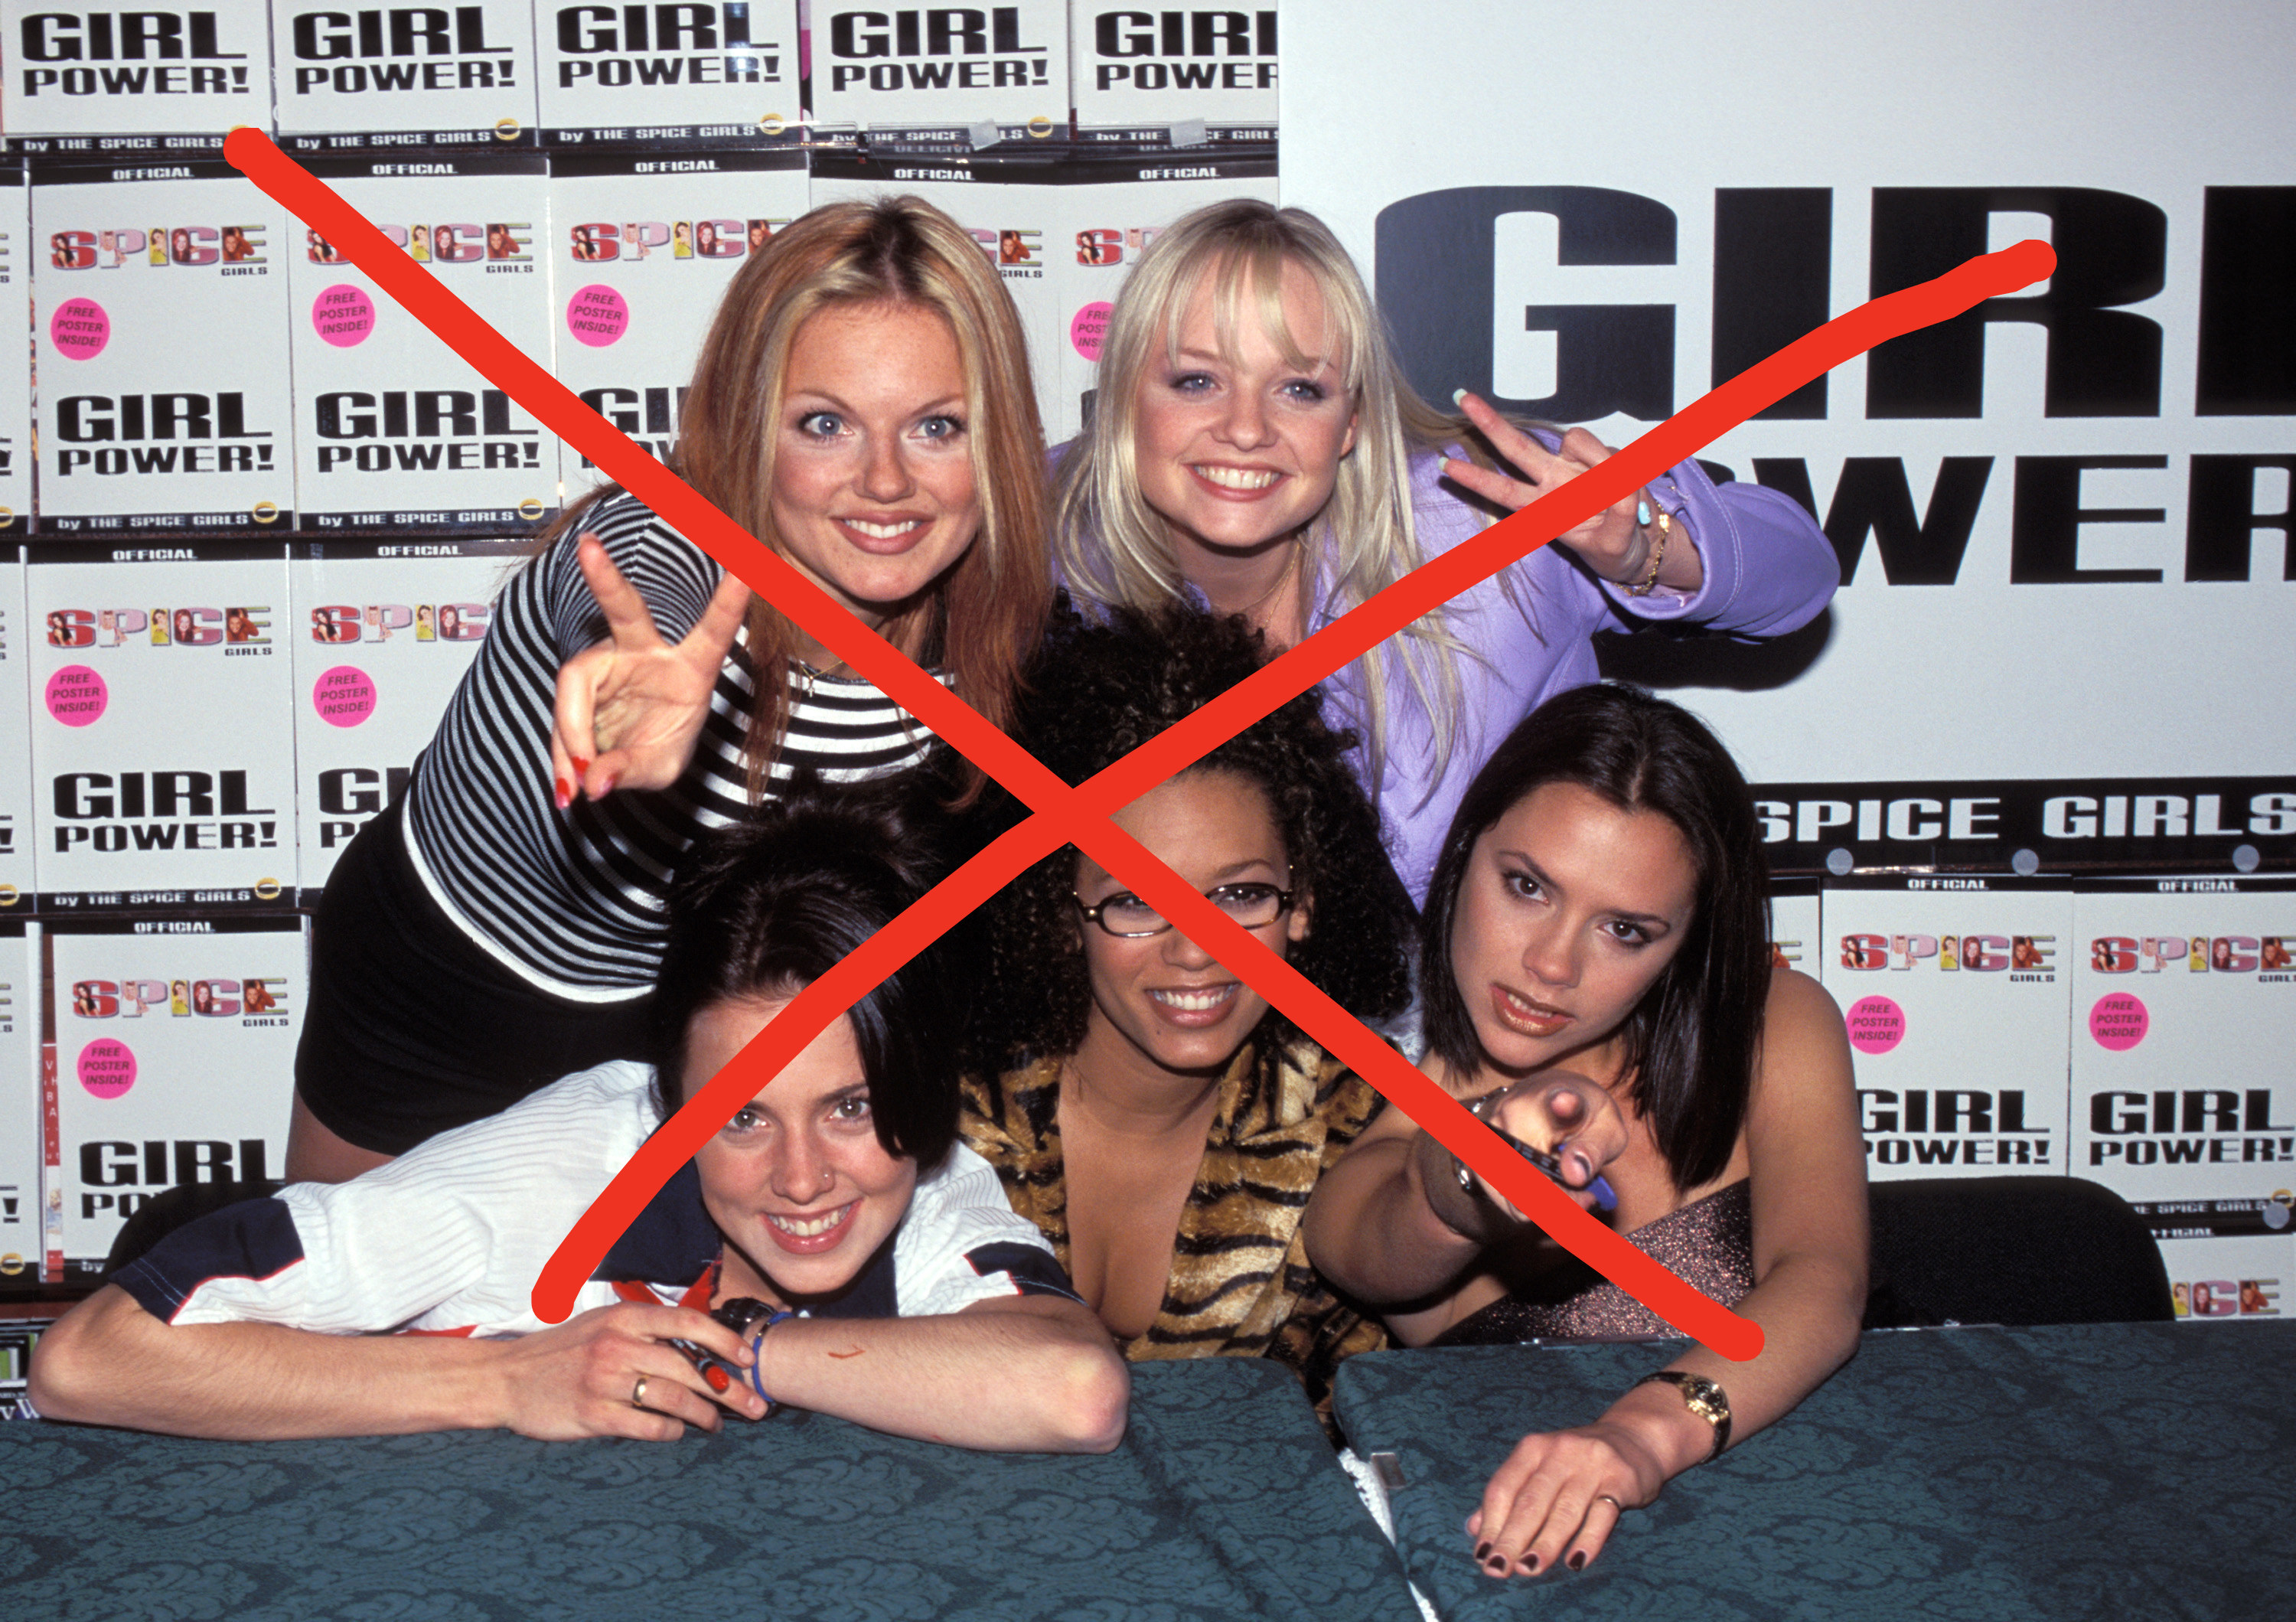 photo of the Spice Girls band with an x over them